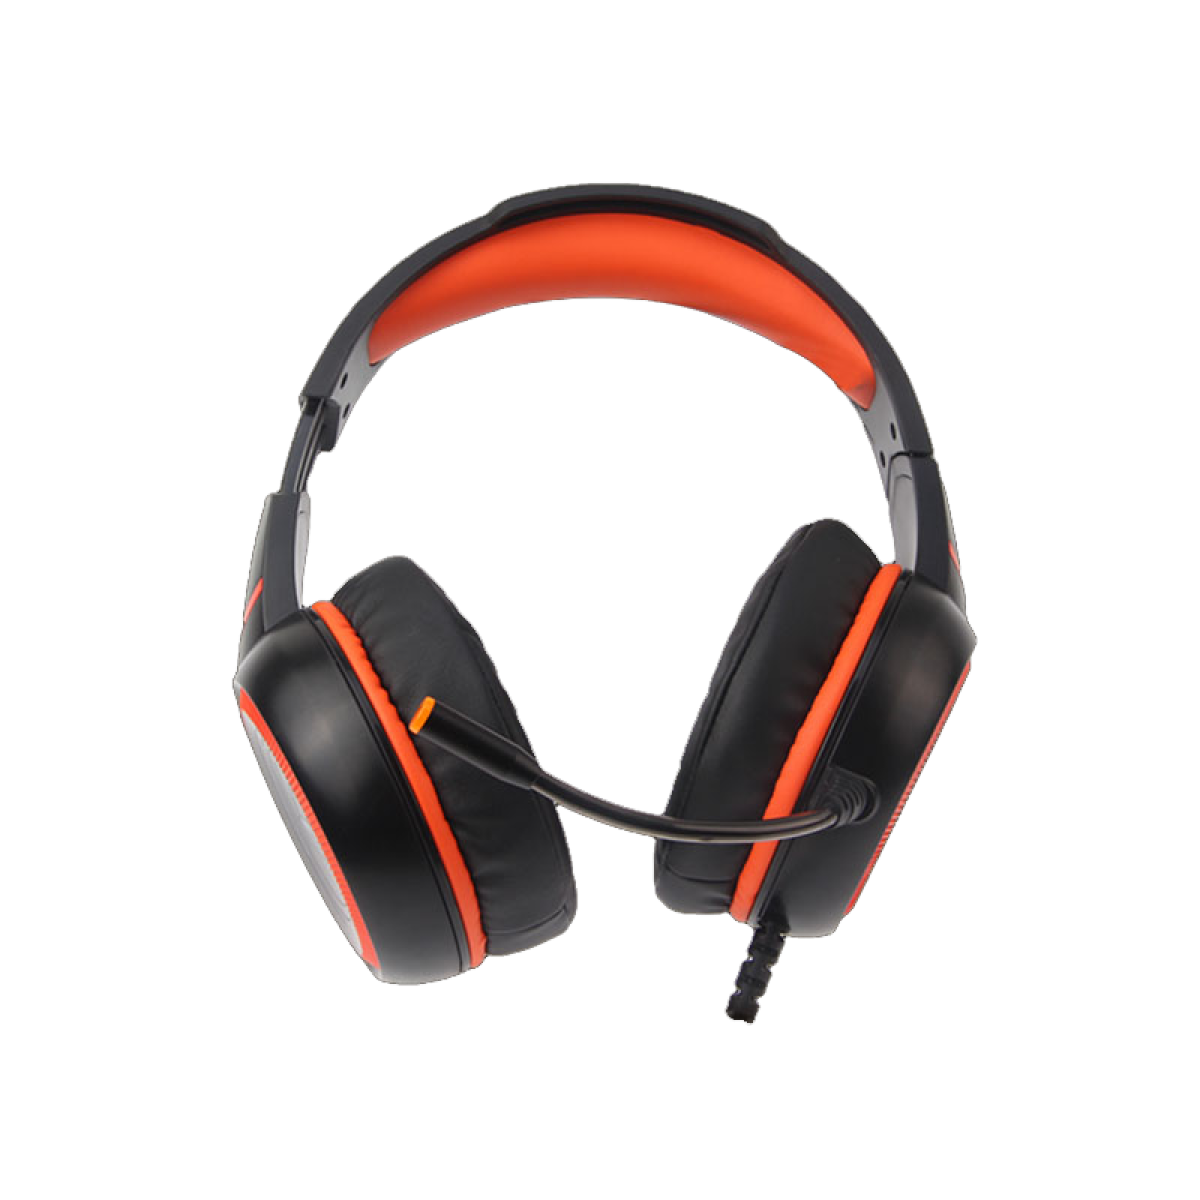 MeeTion Best HIFI 7.1 Gaming Headset & Surround Sound Headphone LED Backlit with Mic